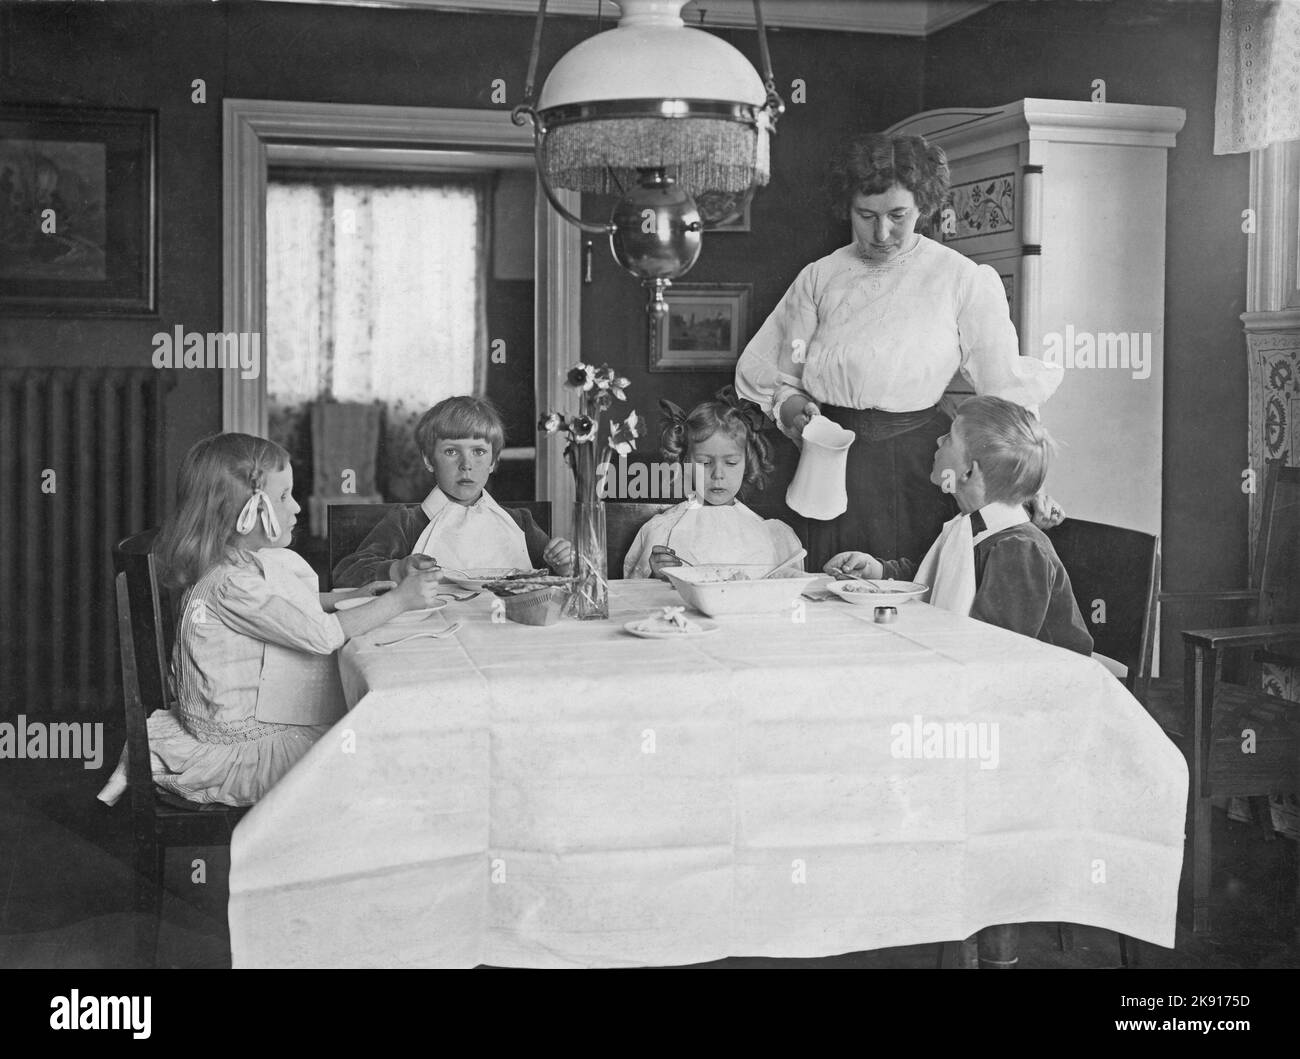 At the turn of the century 1800-1900. A mother with her four children in the dining room where they are eating porridge of some sort. Mum is seen holding the porcelaine jug of milk to pour on the porridge. Sweden 1900 Stock Photo